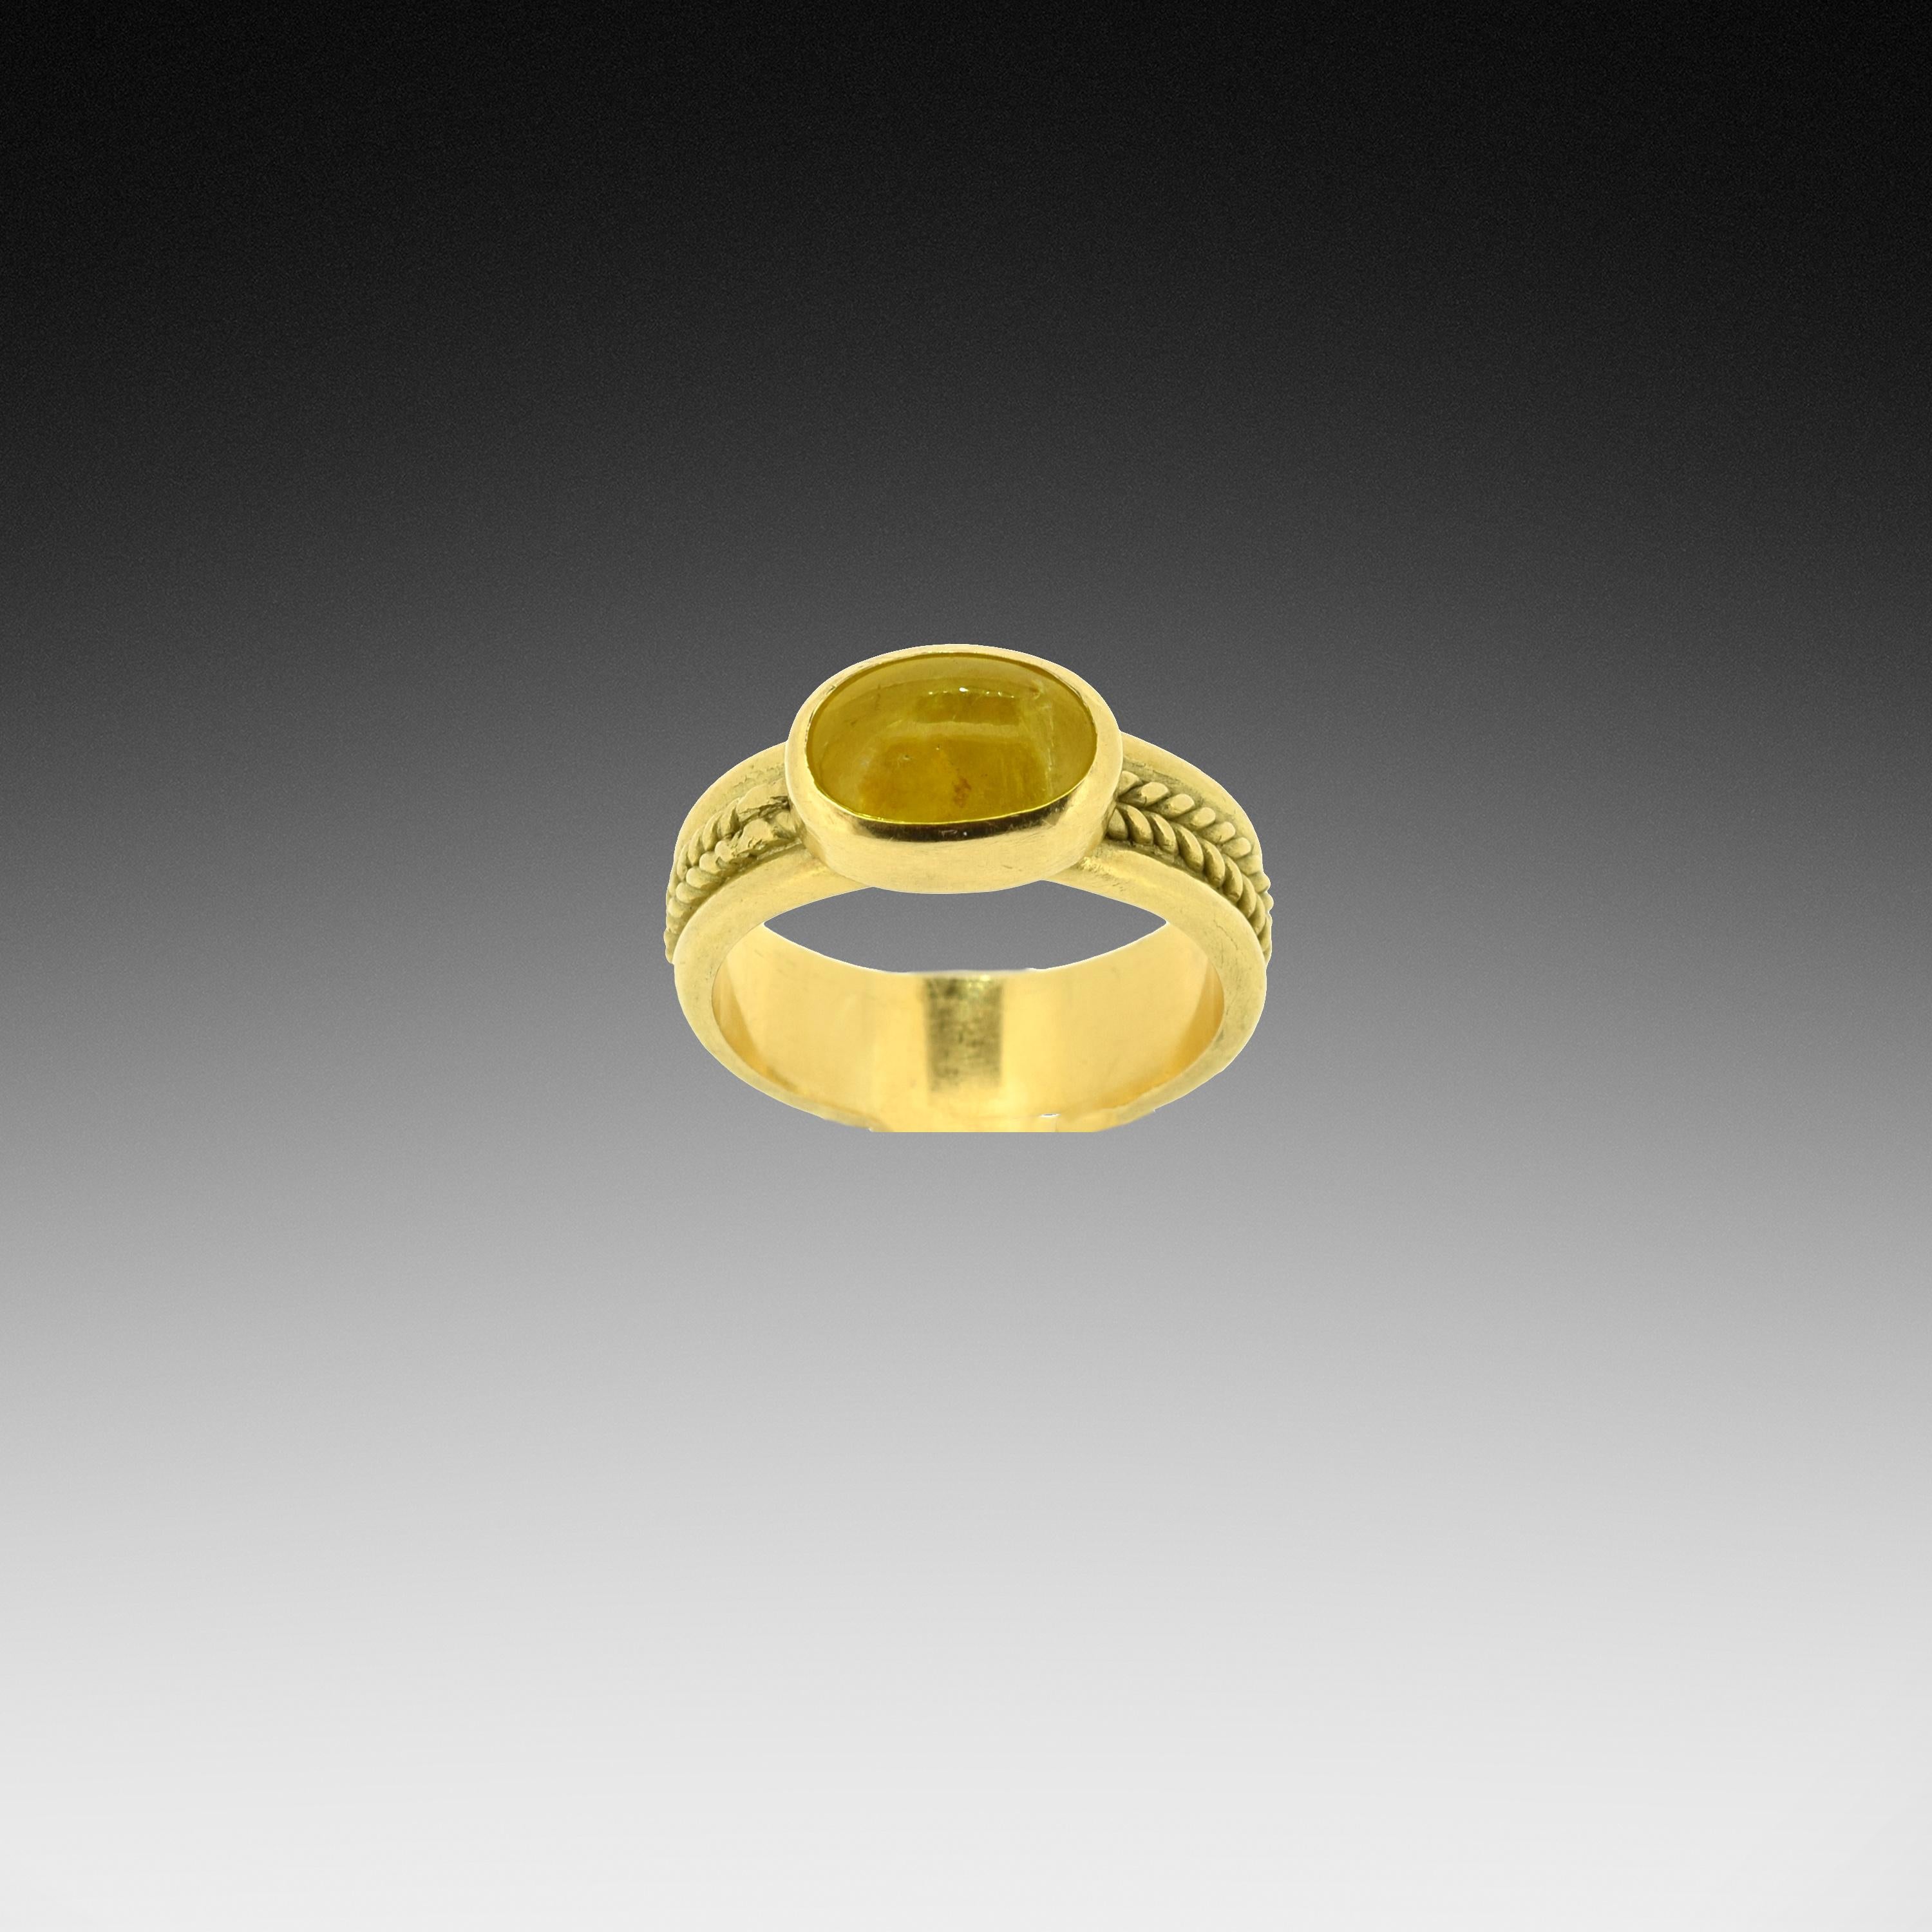 A 3.38 carat smooth Yellow Sapphire from Sri Lanka subtly adorns this 18K rope band.  All handmade and one of a kind.  The ring size is 6.
Due to the nature of this band, the ring cannot be re-sized.

Note: Photos 4 & 5 show this ring stacked with a